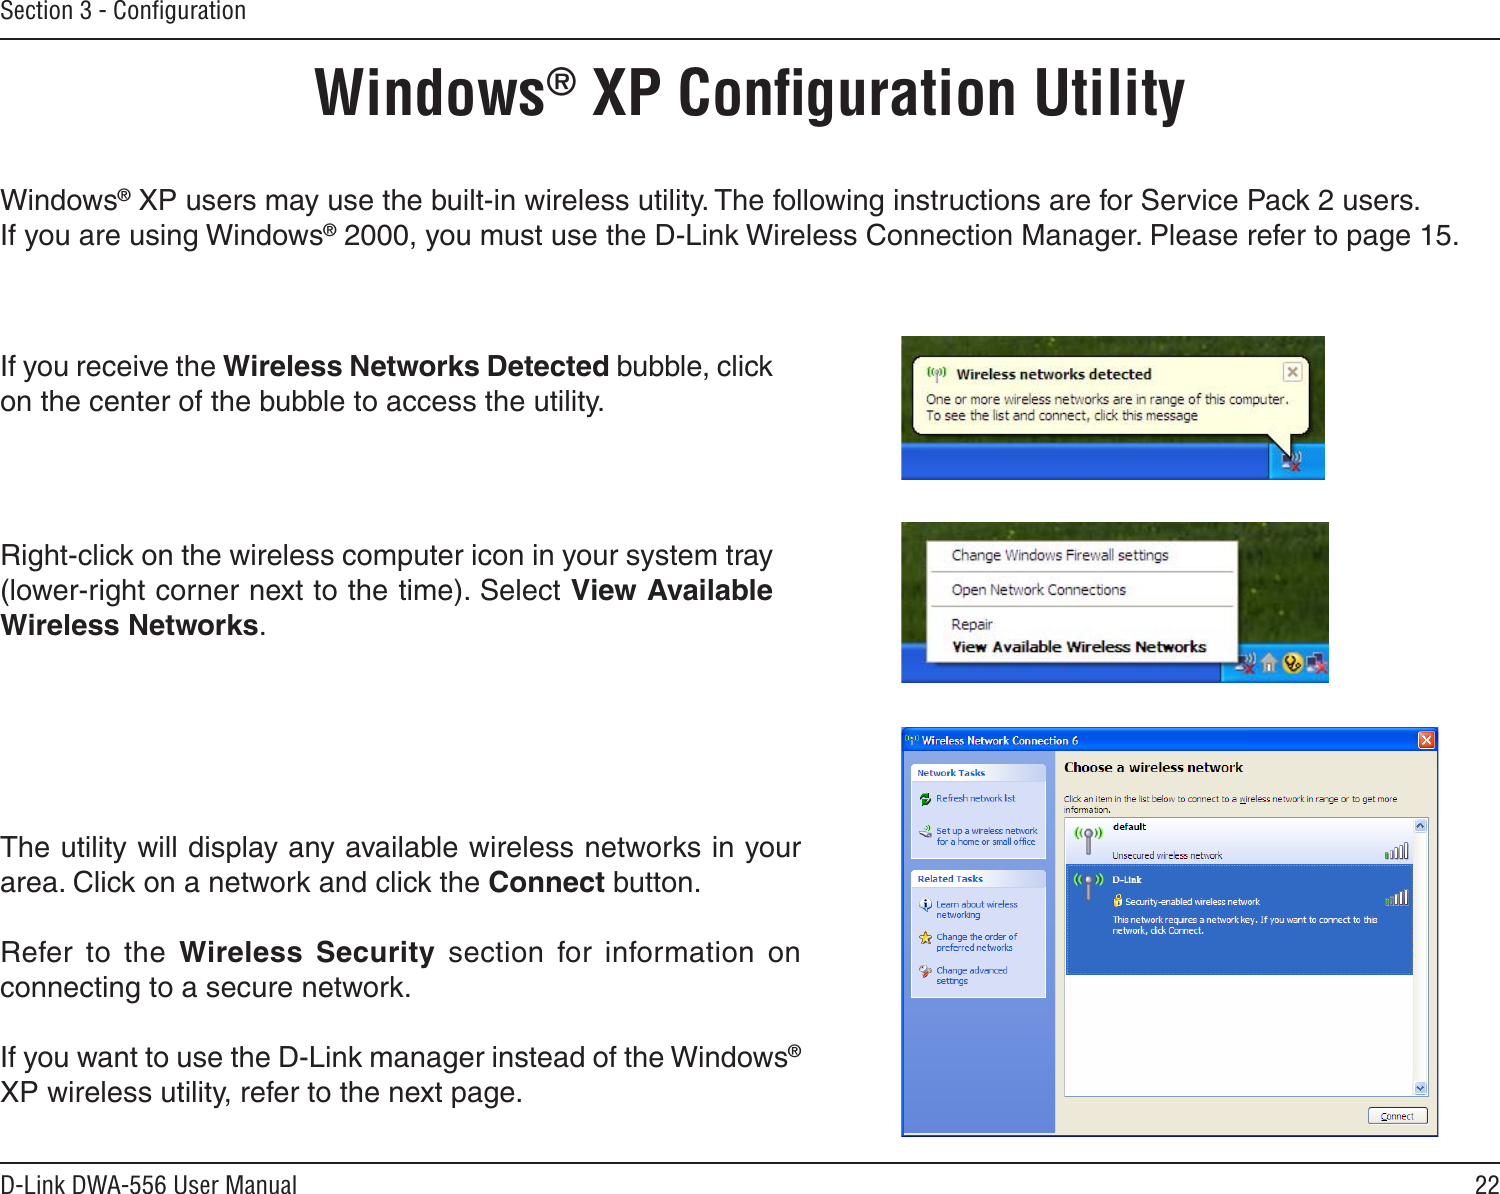 22D-Link DWA-556 User ManualSection 3 - ConﬁgurationWindows® XP Conﬁguration UtilityWindows® XP users may use the built-in wireless utility. The following instructions are for Service Pack 2 users. If you are using Windows® 2000, you must use the D-Link Wireless Connection Manager. Please refer to page 15.Right-click on the wireless computer icon in your system tray (lower-right corner next to the time). Select View Available Wireless Networks.If you receive the Wireless Networks Detected bubble, click on the center of the bubble to access the utility.The utility will display any available wireless networks in your area. Click on a network and click the Connect button.Refer  to  the  Wireless  Security  section  for  information  on connecting to a secure network.If you want to use the D-Link manager instead of the Windows® XP wireless utility, refer to the next page.